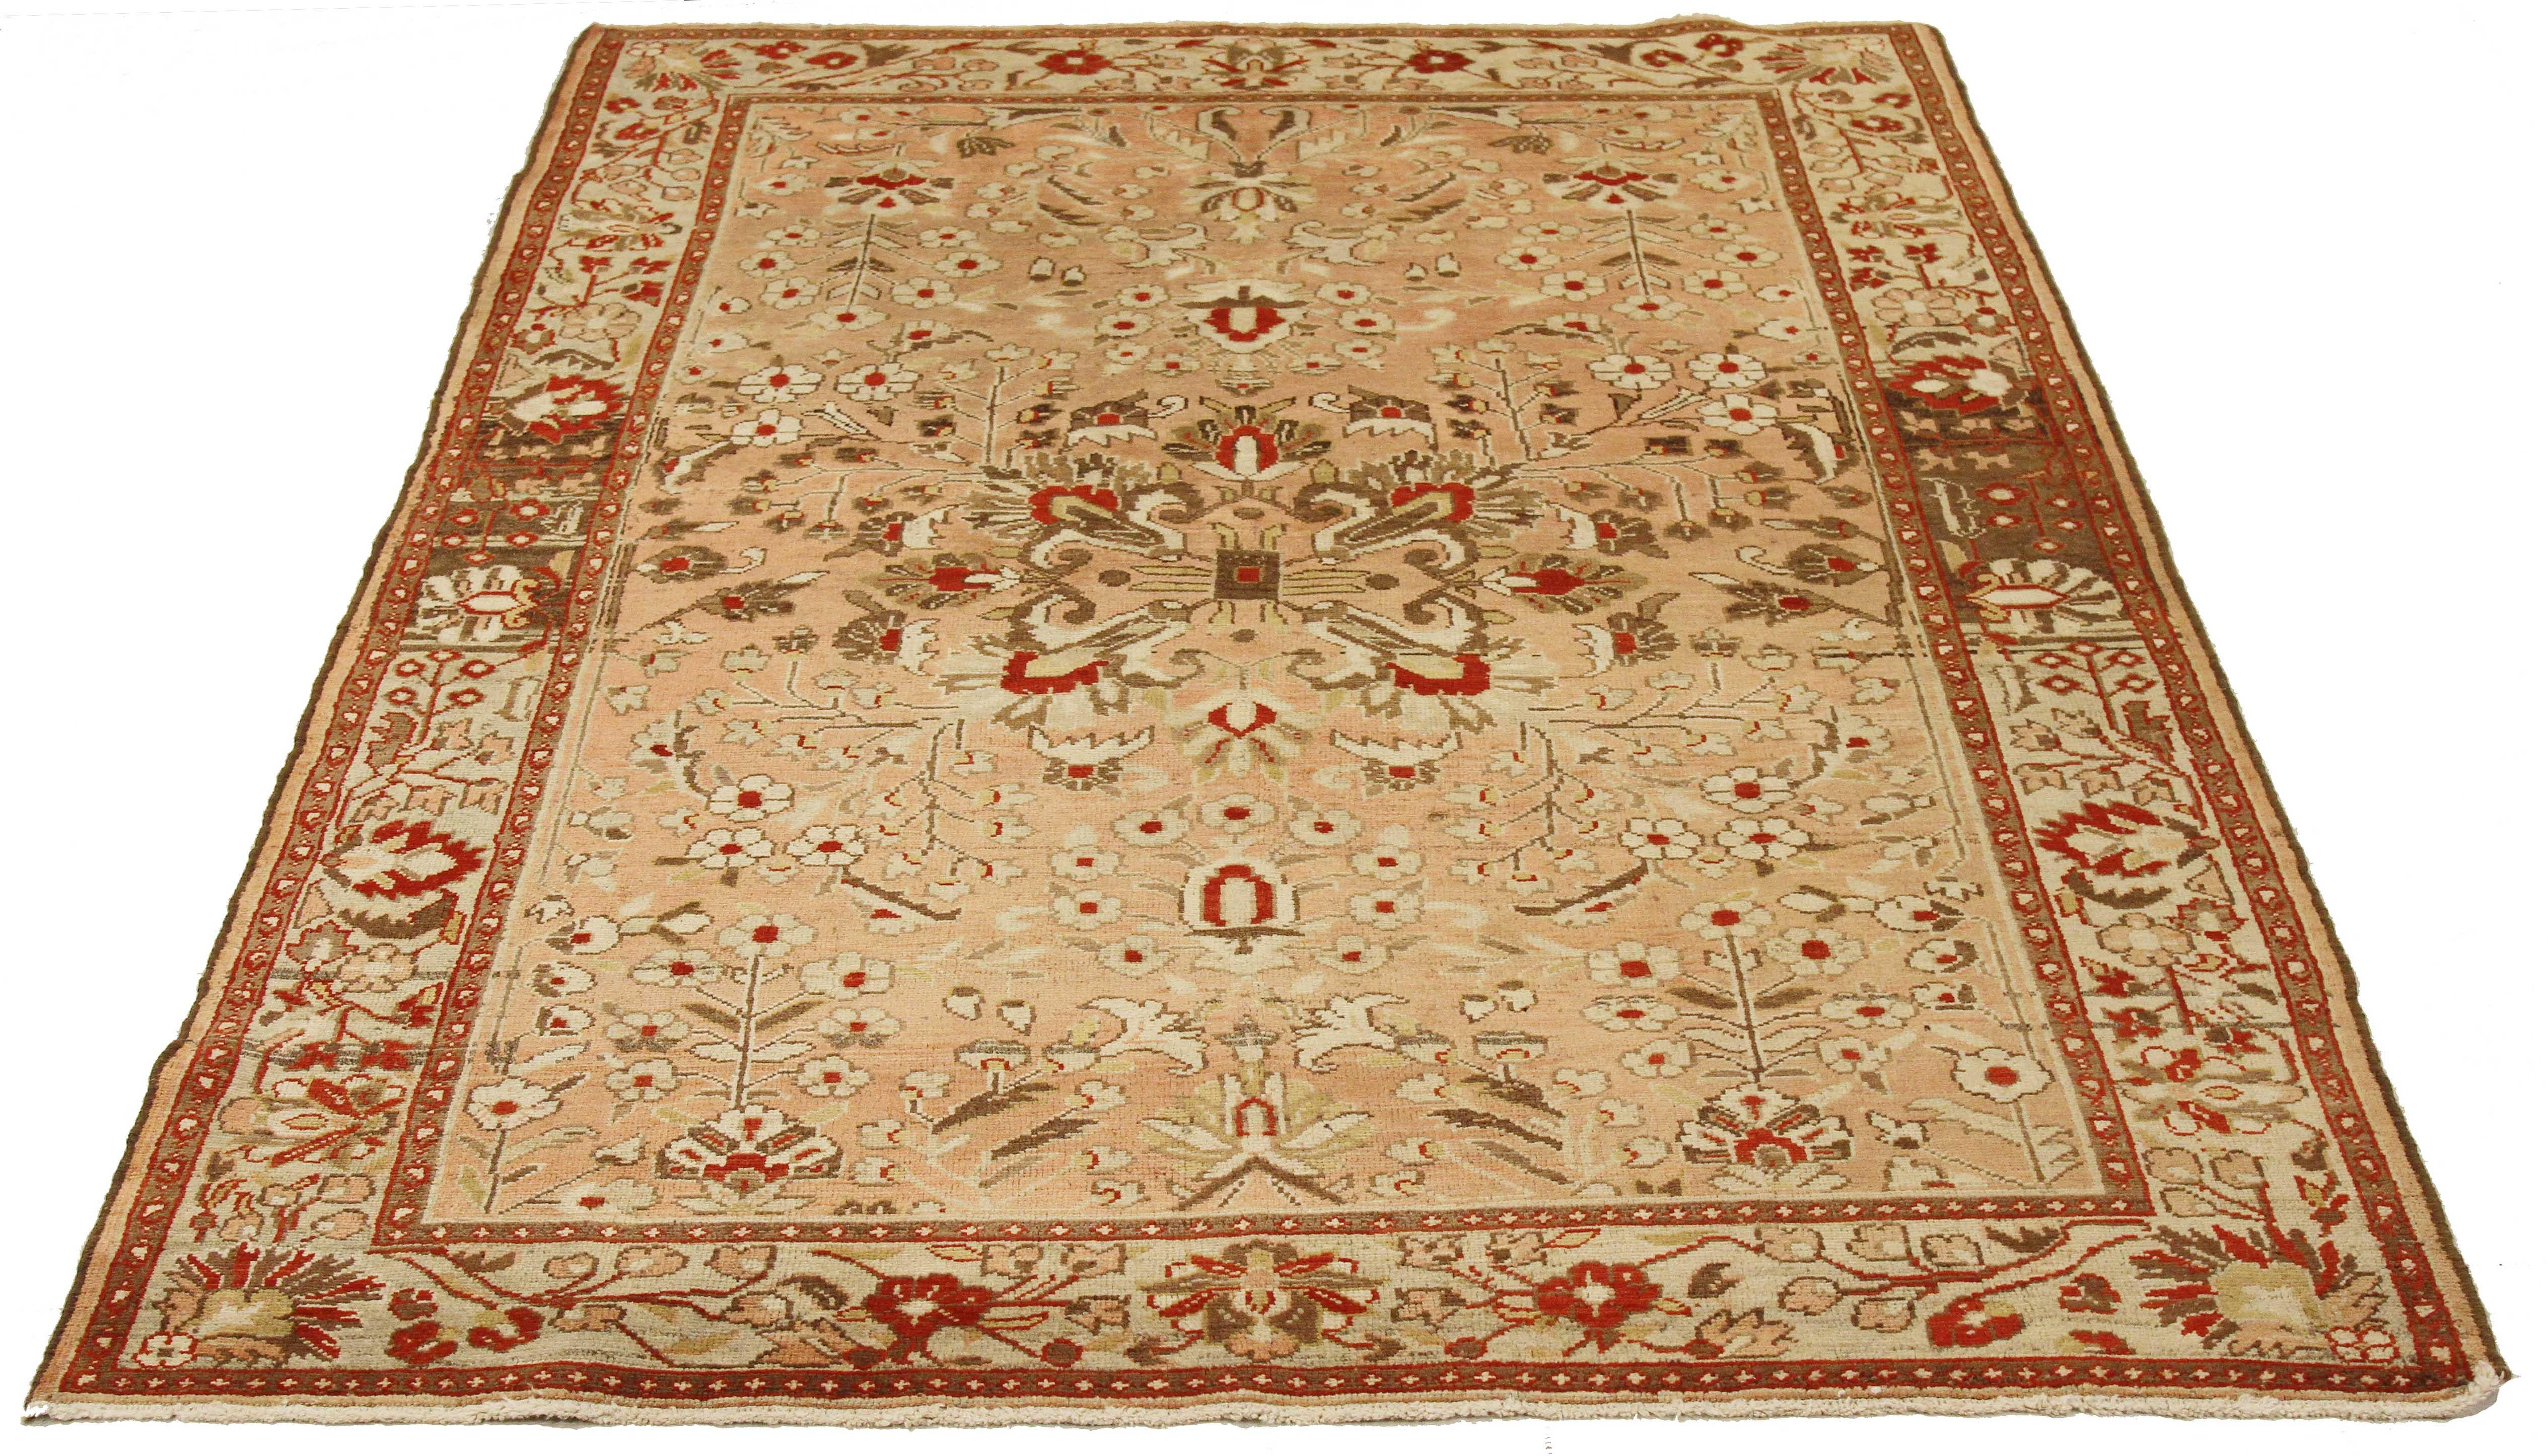 Antique Persian runner rug handwoven from the finest sheep’s wool and colored with all-natural vegetable dyes that are safe for humans and pets. It’s a traditional Malayer design featuring ivory, brown and green floral and geometric details over a